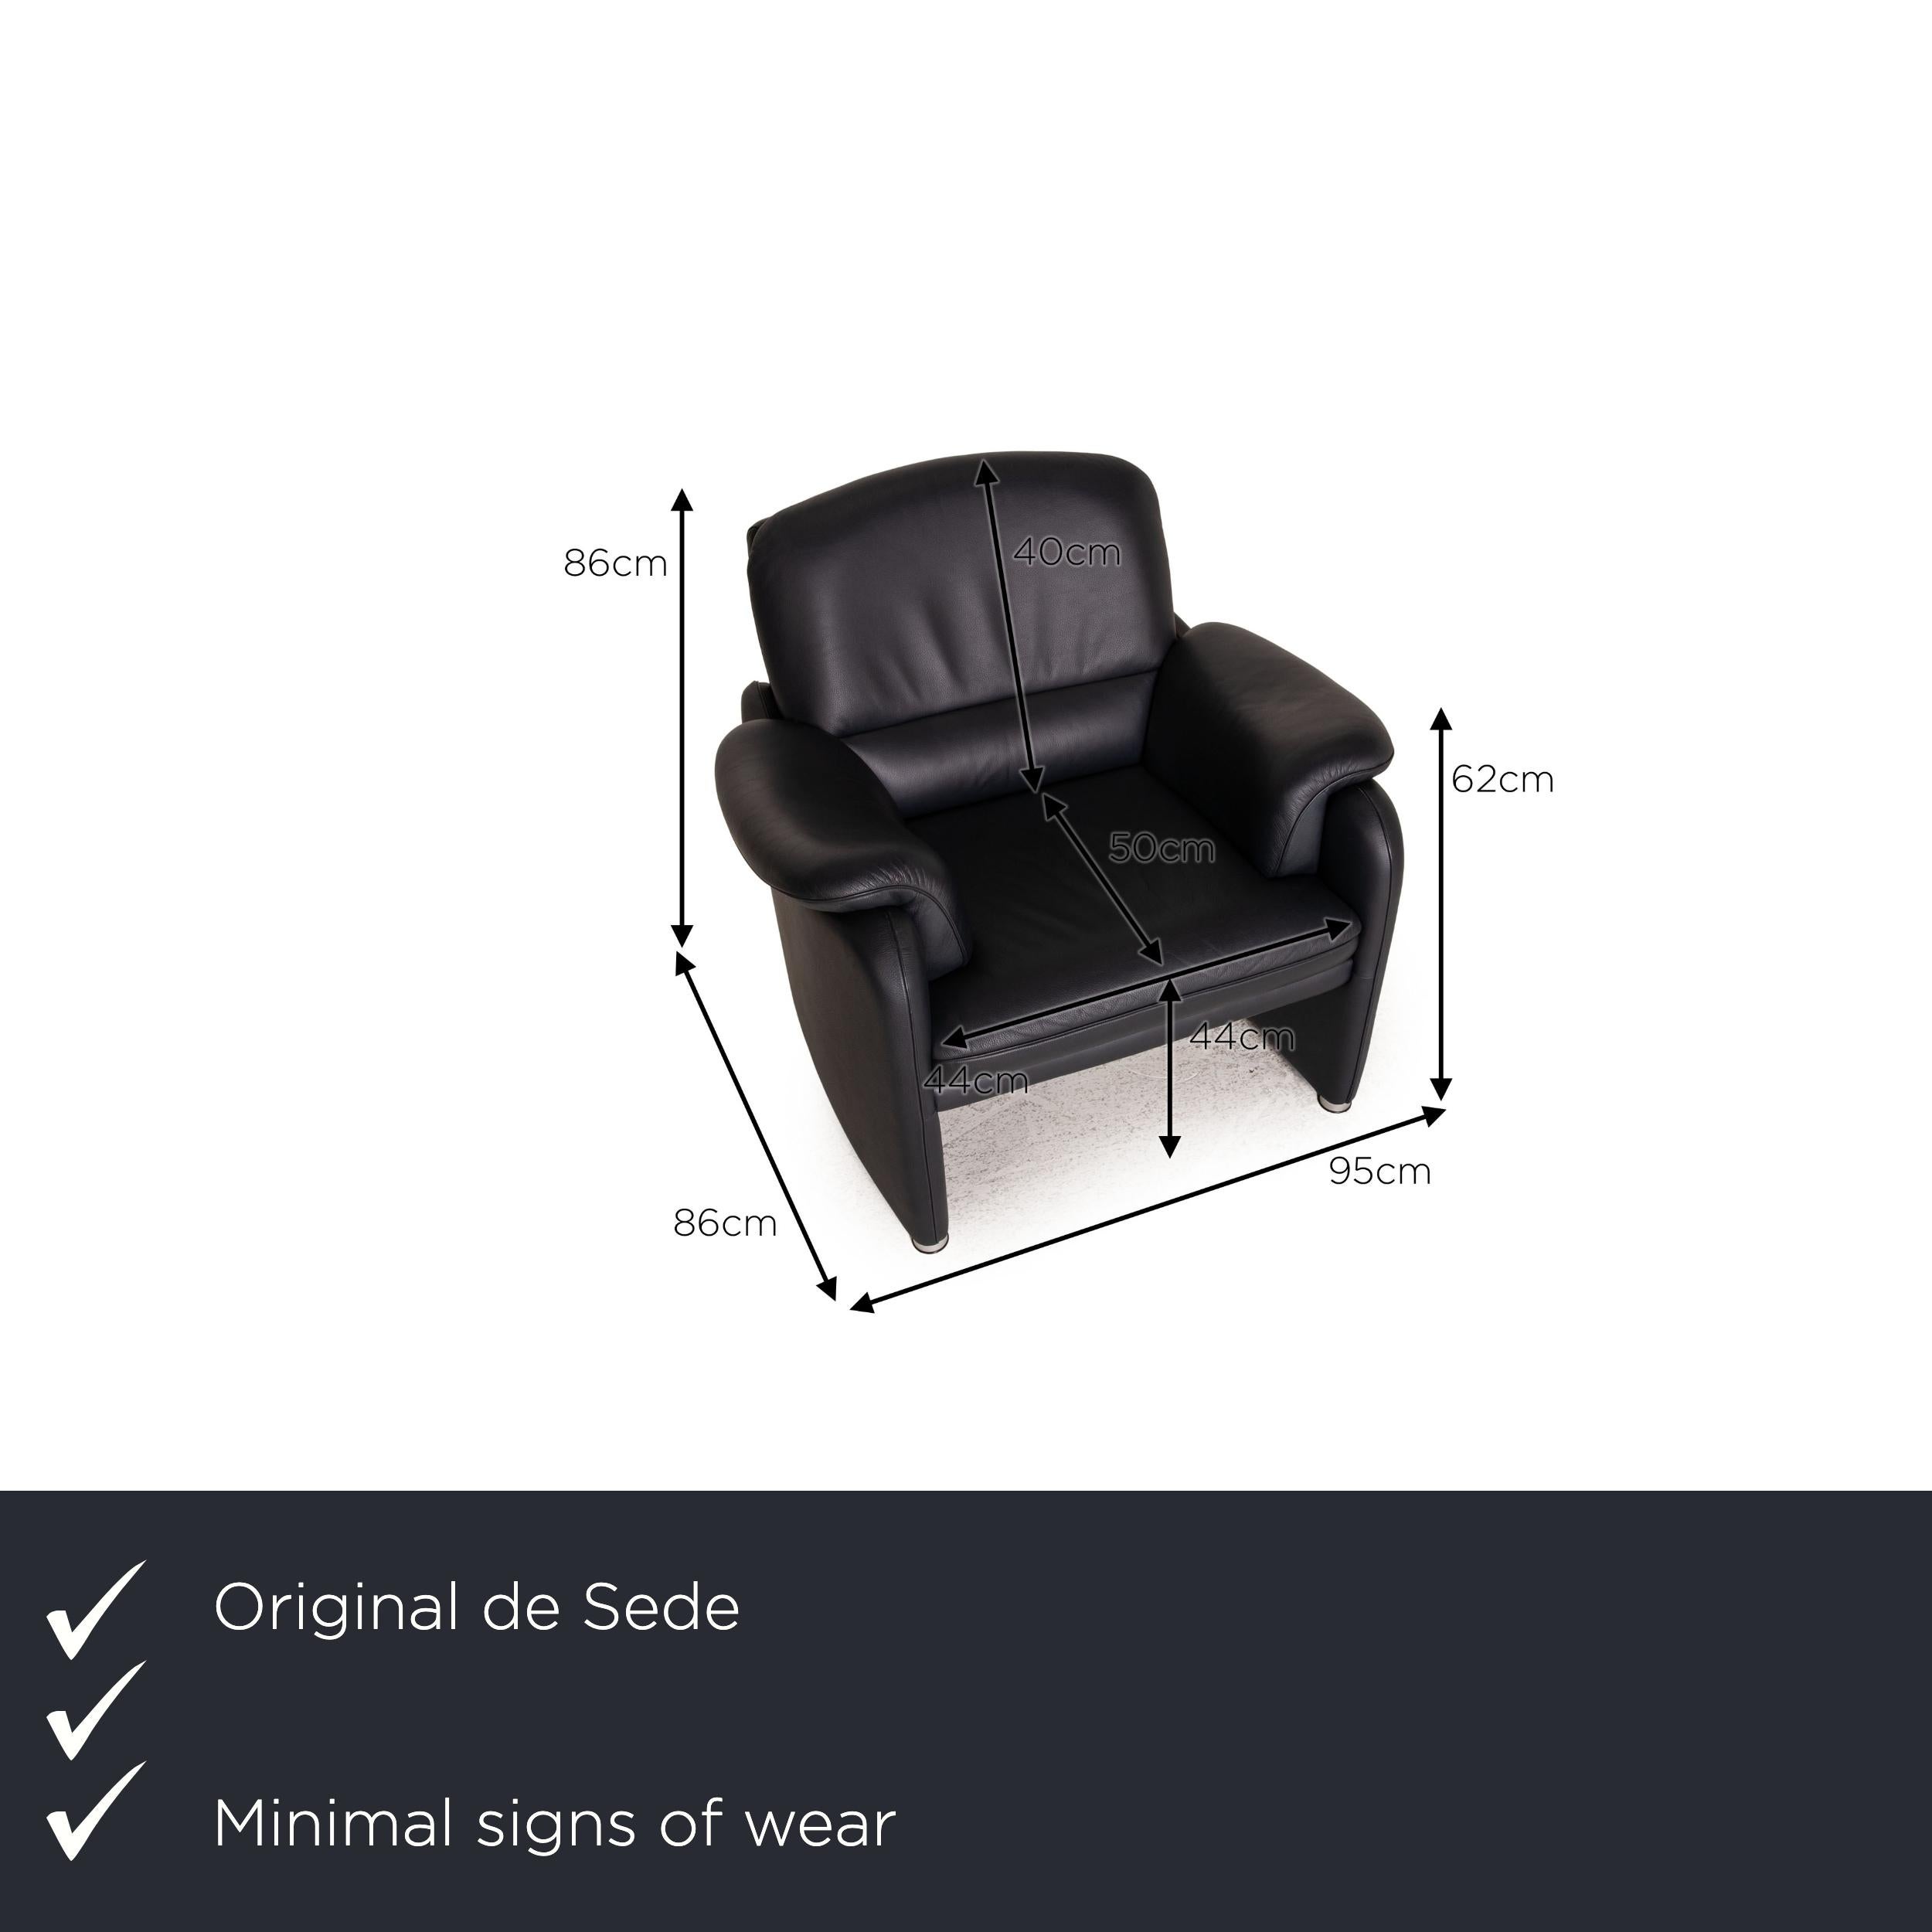 We present to you a de sede DS 320 leather armchair dark blue.

Product measurements in centimeters:

depth: 86
width: 95
height: 86
seat height: 44
rest height: 62
seat depth: 50
seat width: 44
back height: 40.


 